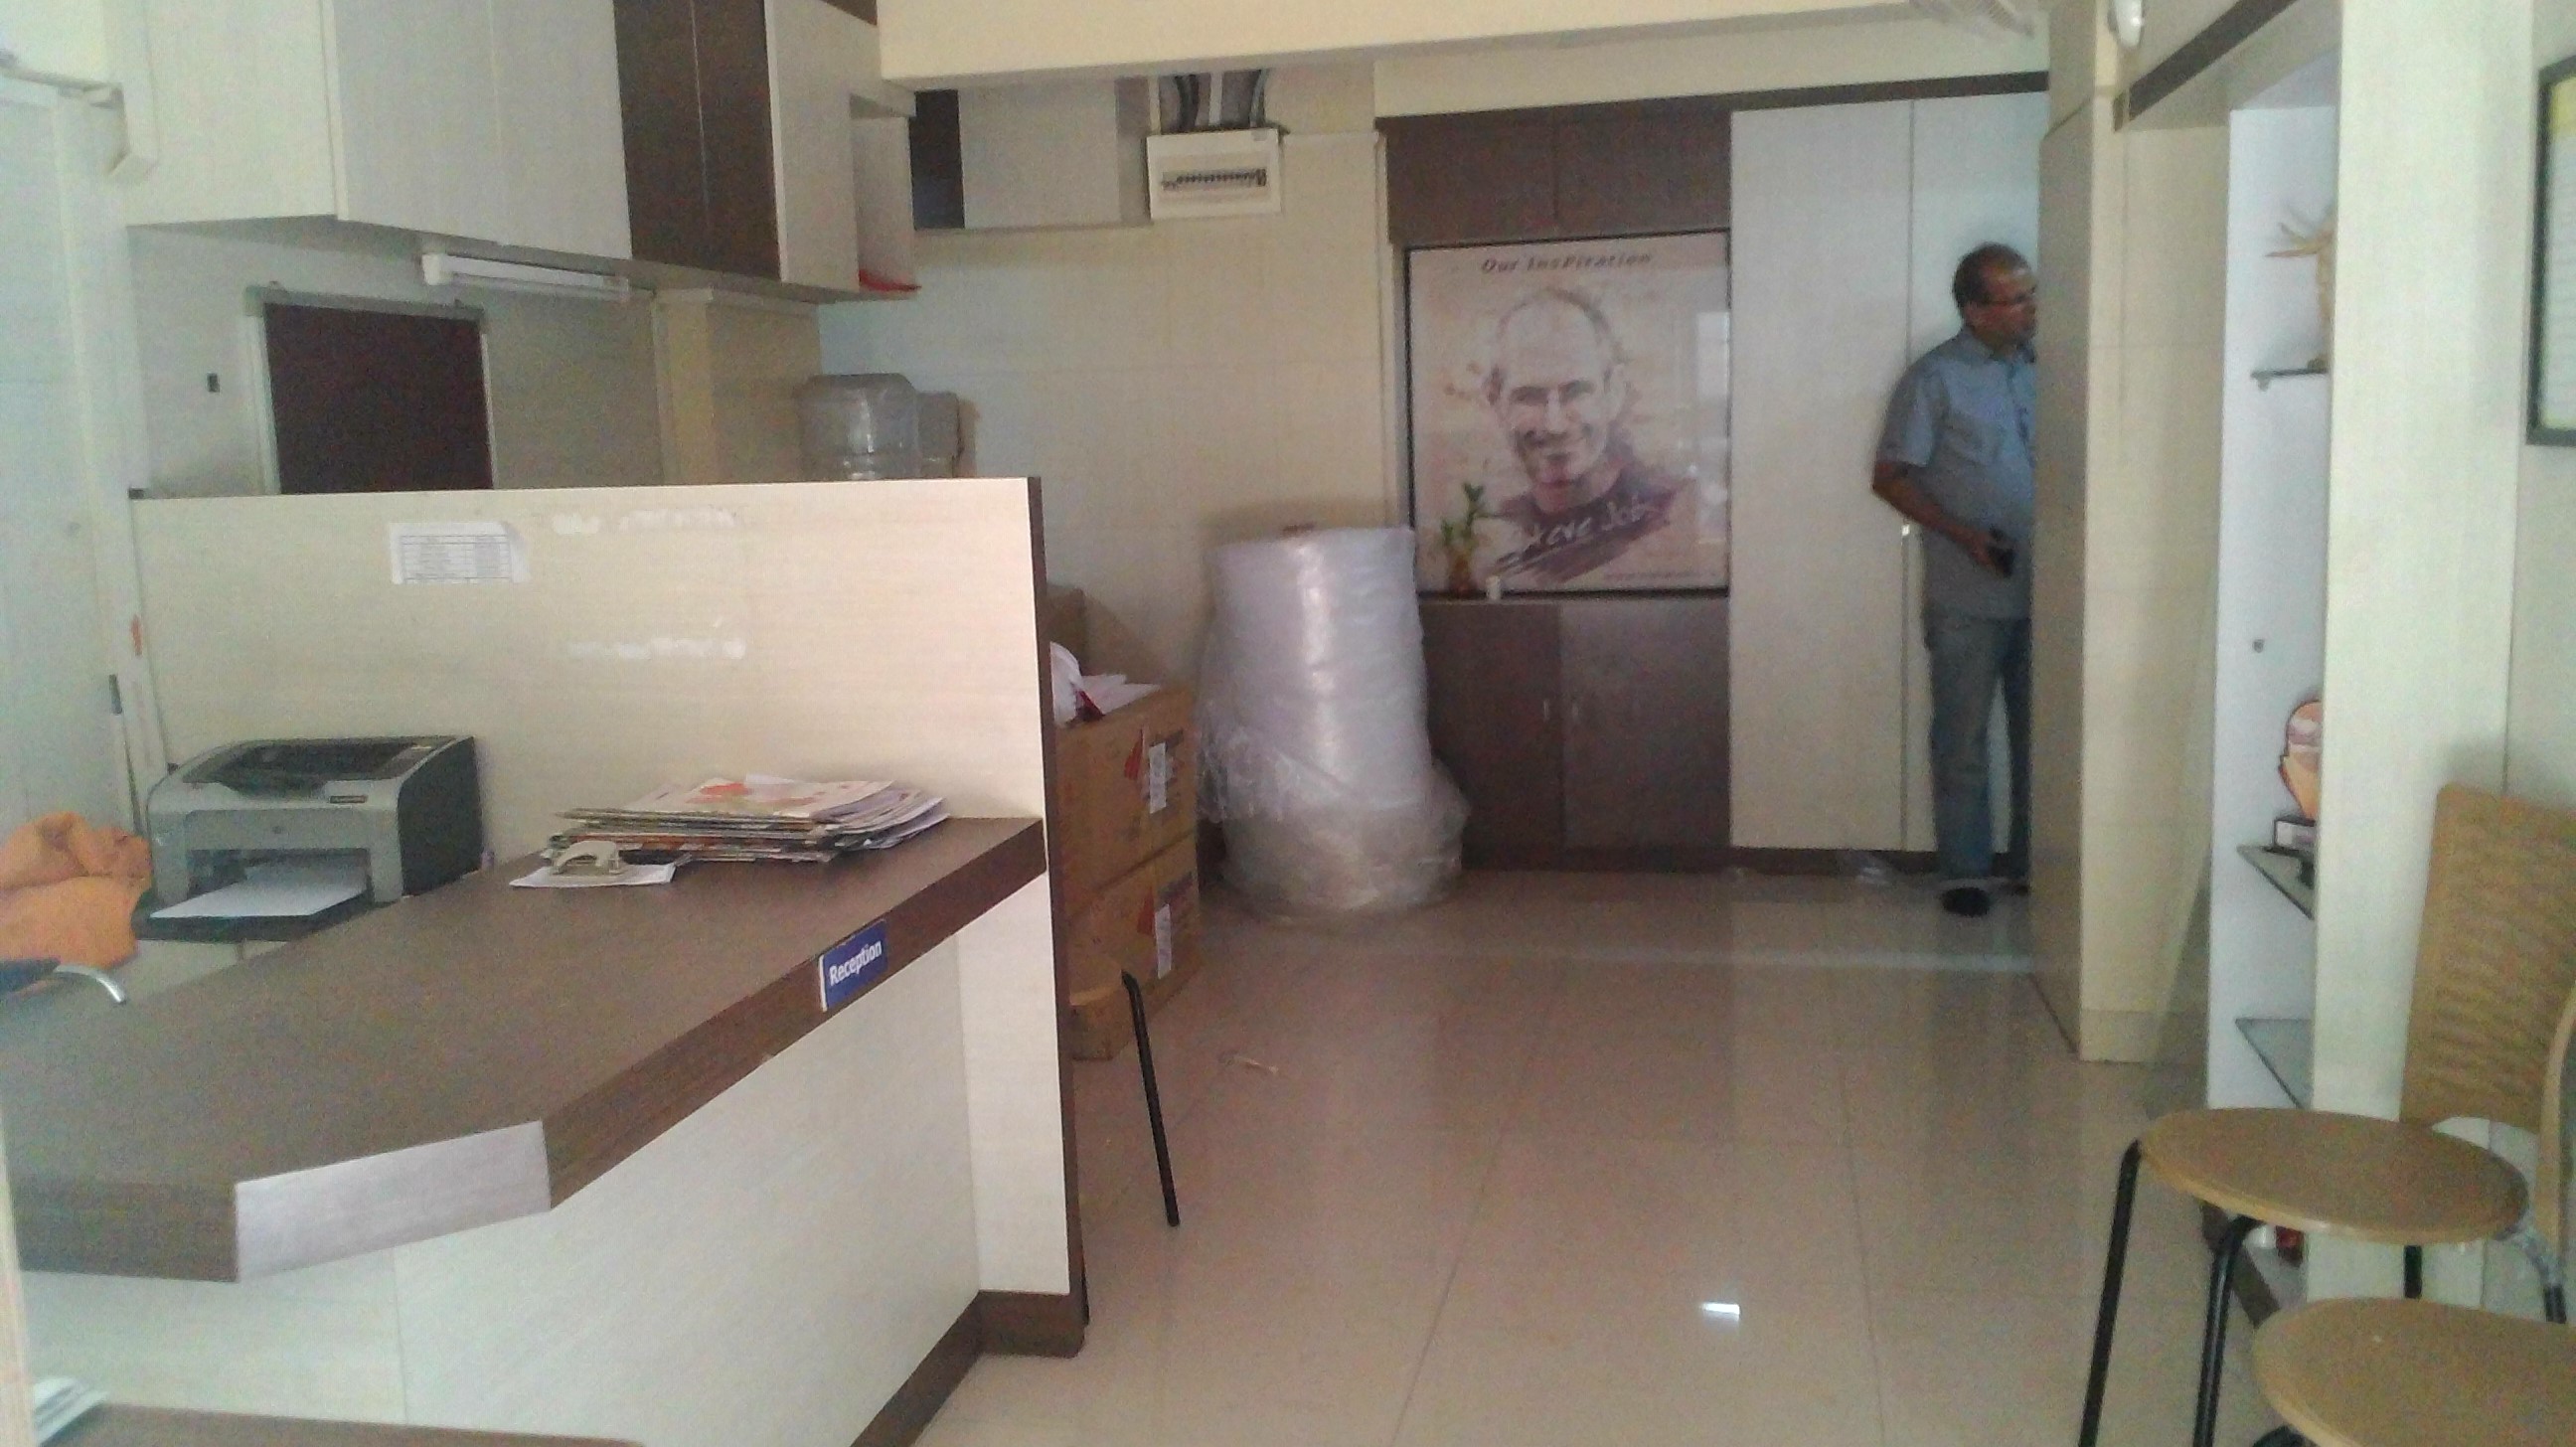 Commercial Office Space for Rent in Fully Furnished office for Rent, Near Bedekar Hospital,, Thane-West, Mumbai